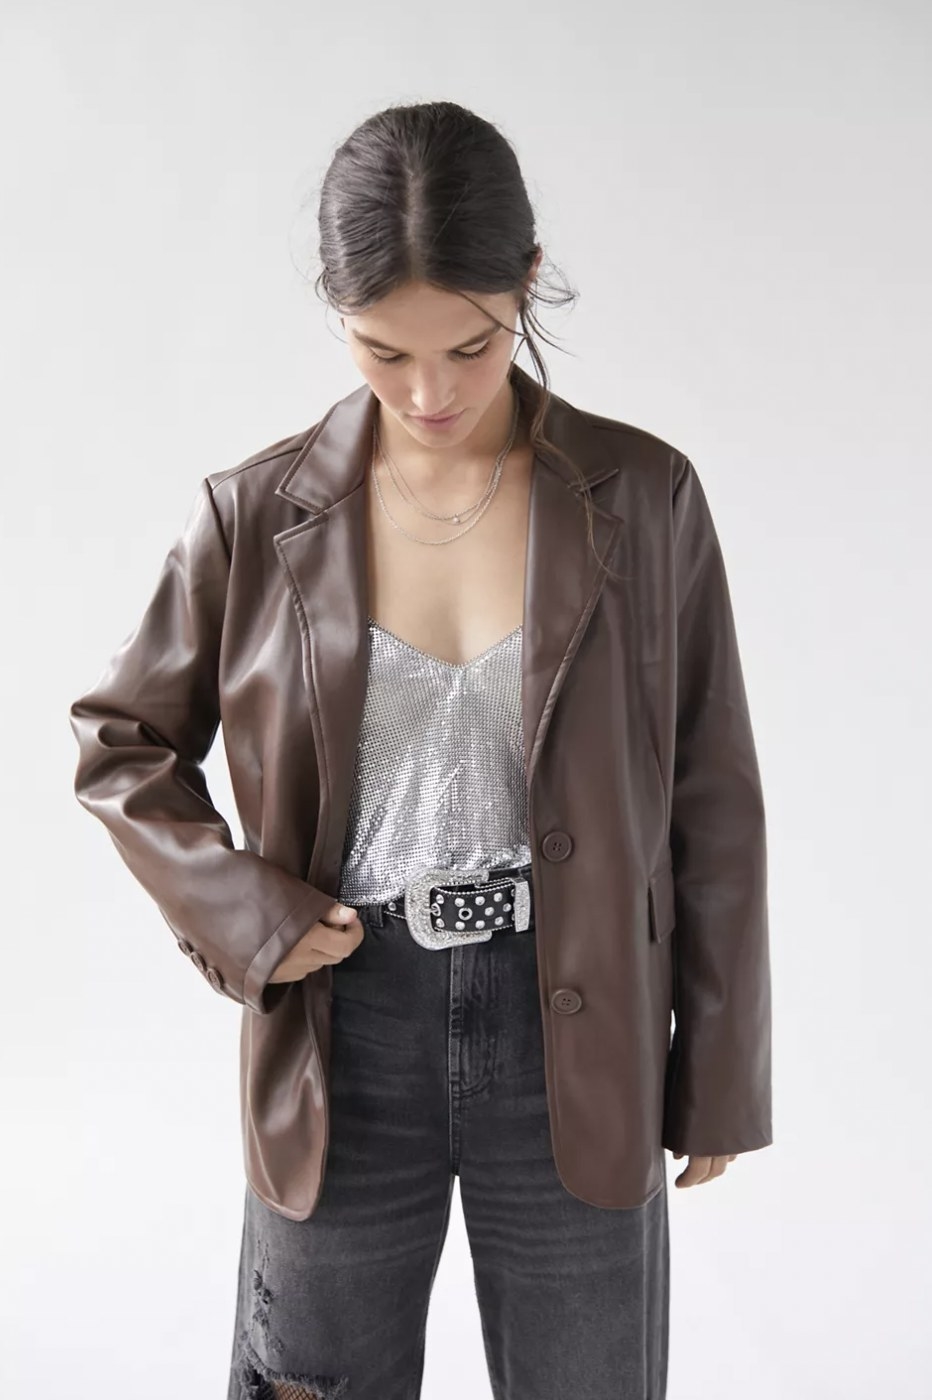 Model looking down while wearing the brown jacket over sparkly tank and black jeans